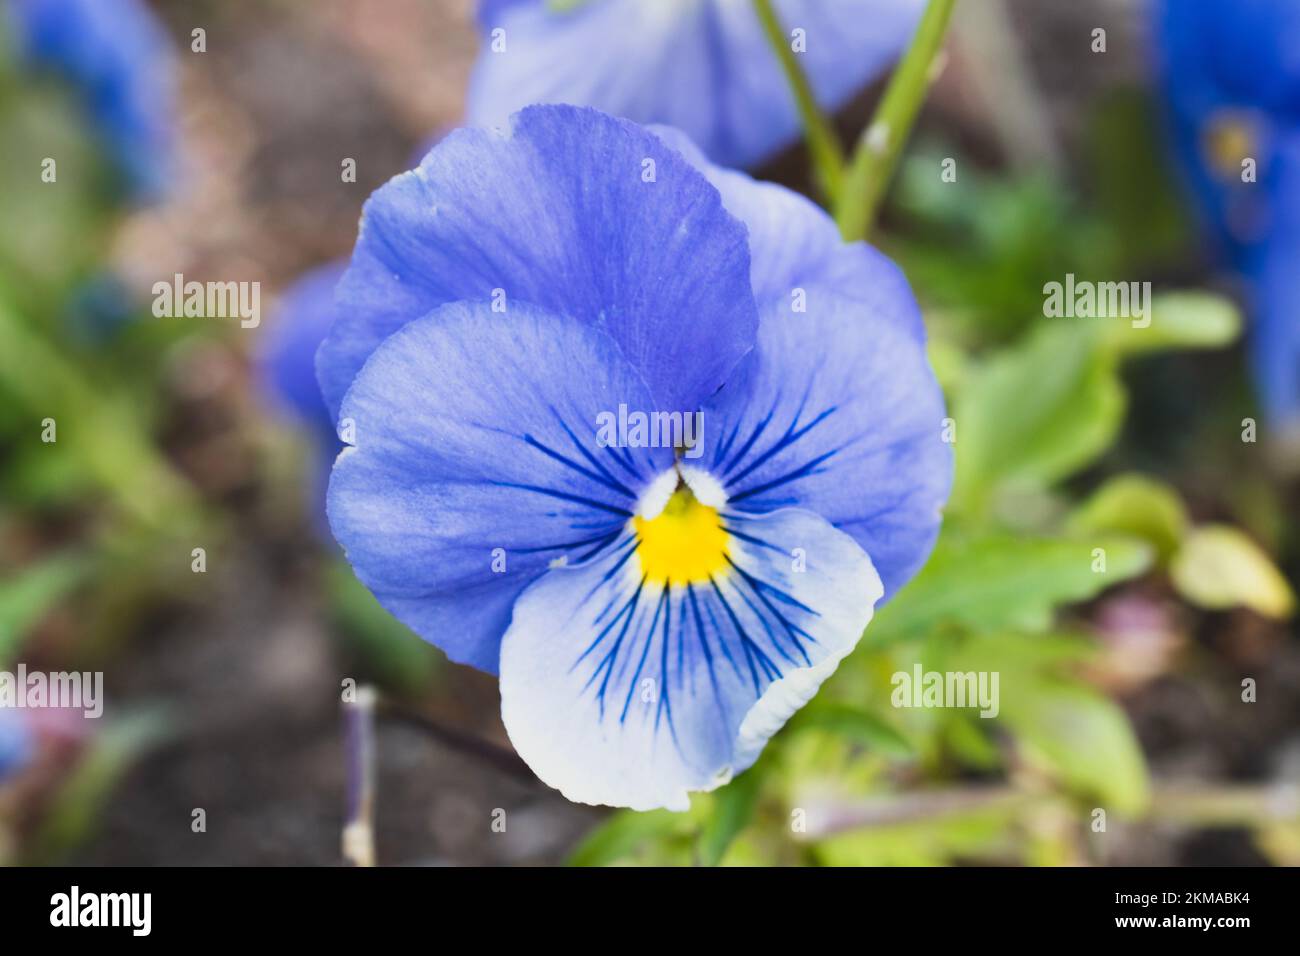 A purple, blue, and yellow Viola flower in bloom. Stock Photo